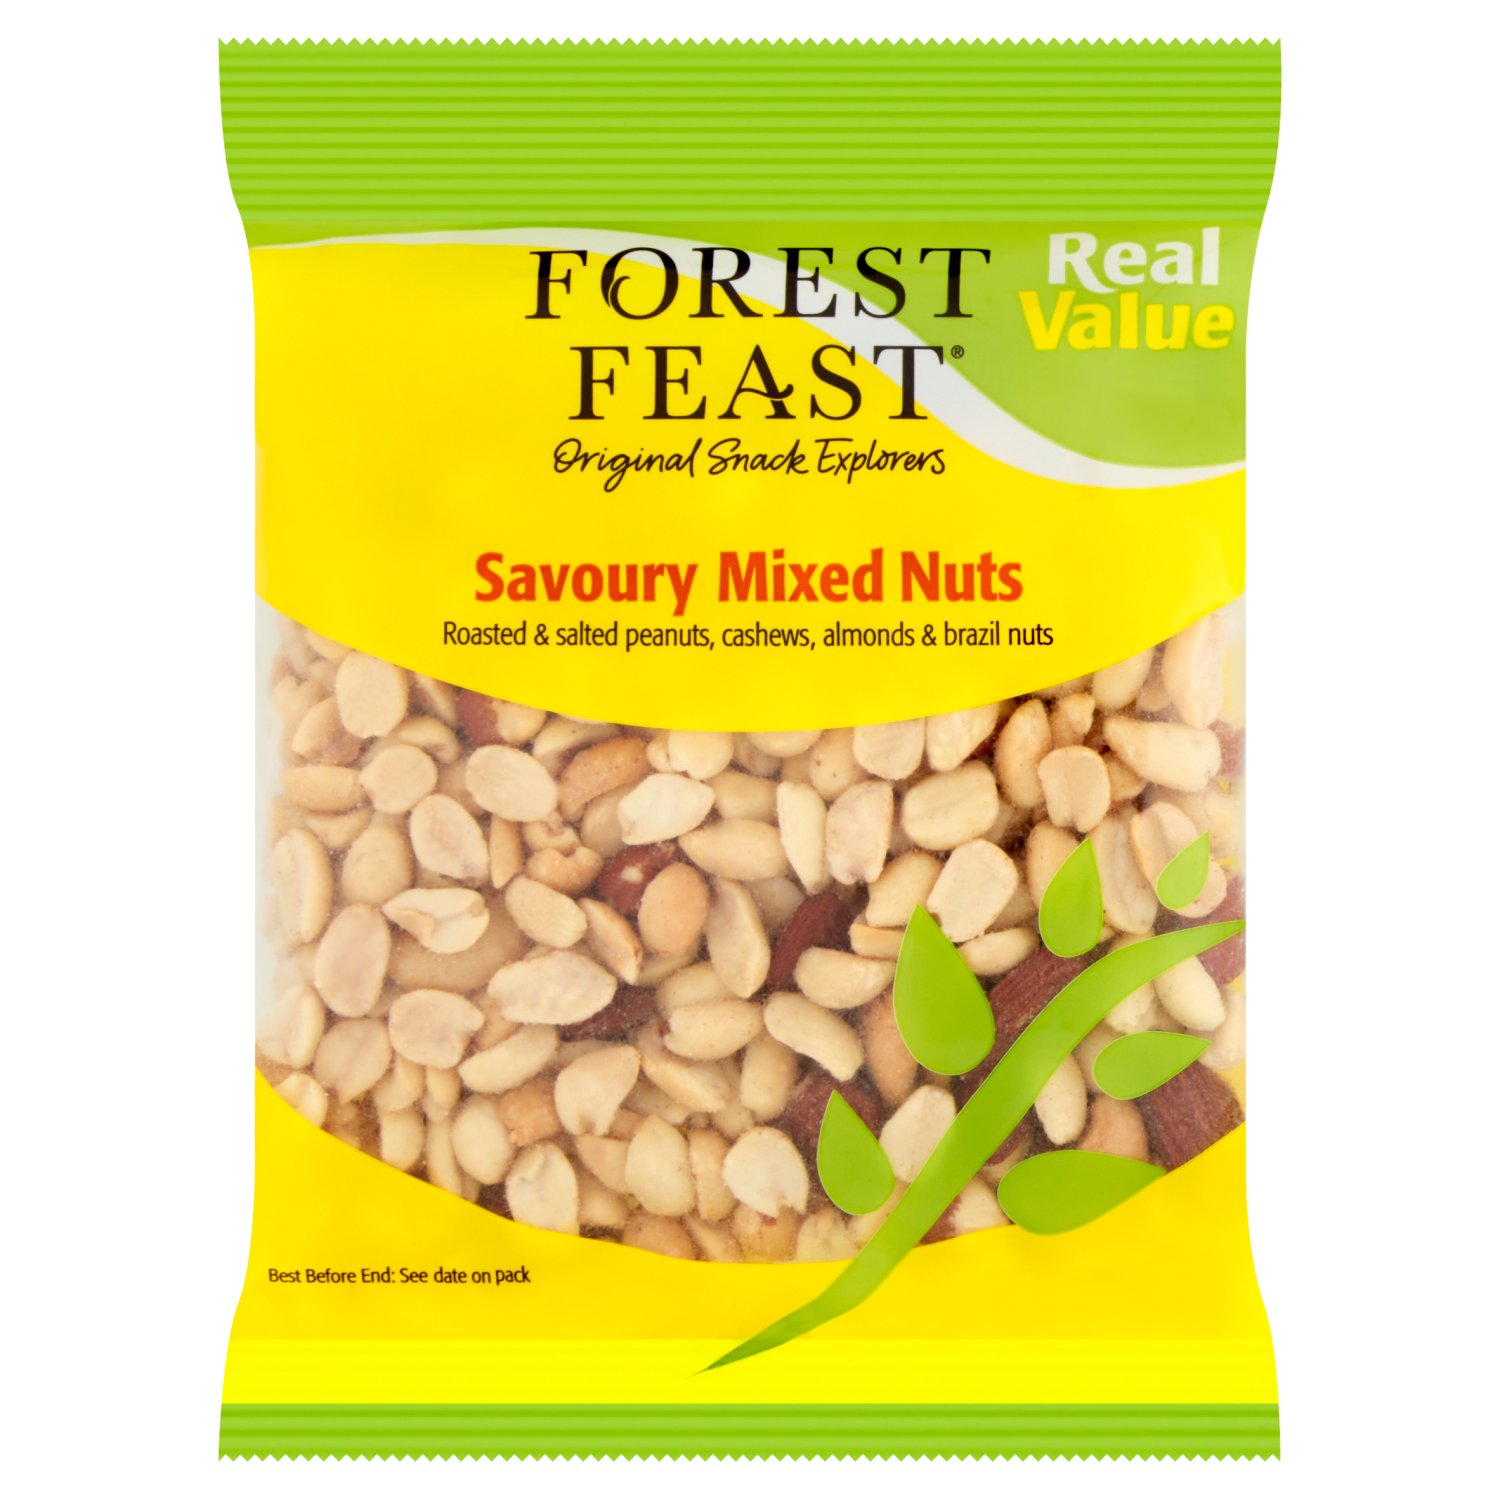 Forest Feast Real Value Savoury Mixed Nuts Bag (170 g)